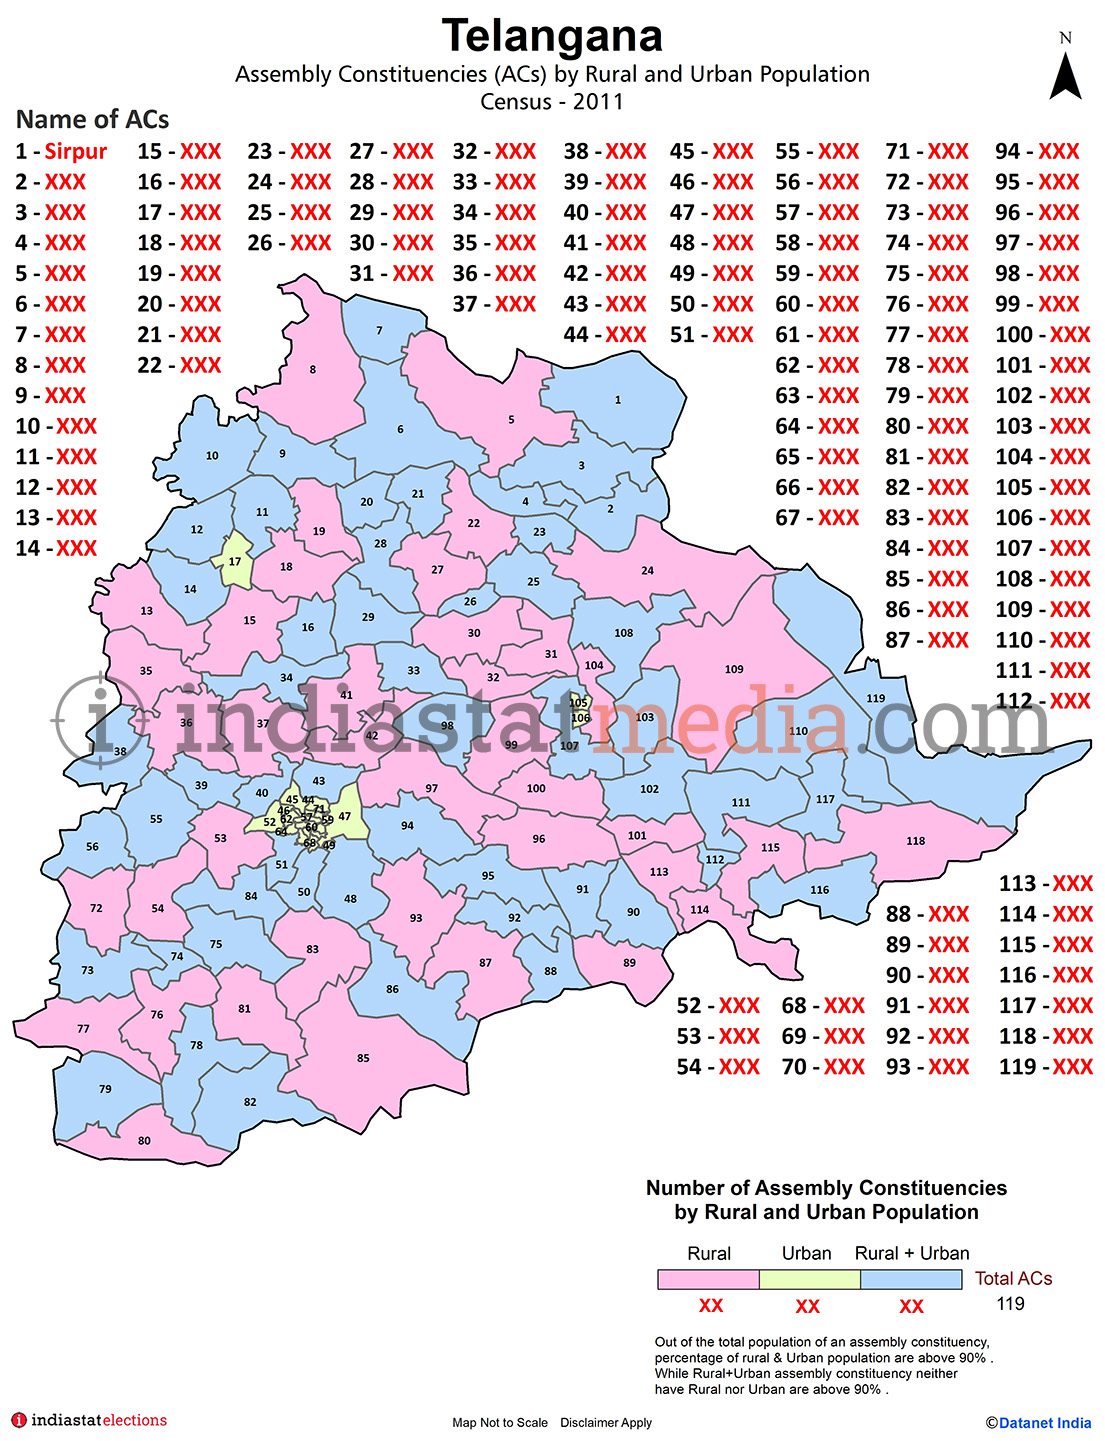 Assembly Constituencies (ACs) by Rural and Urban Population in Telangana- Census 2011